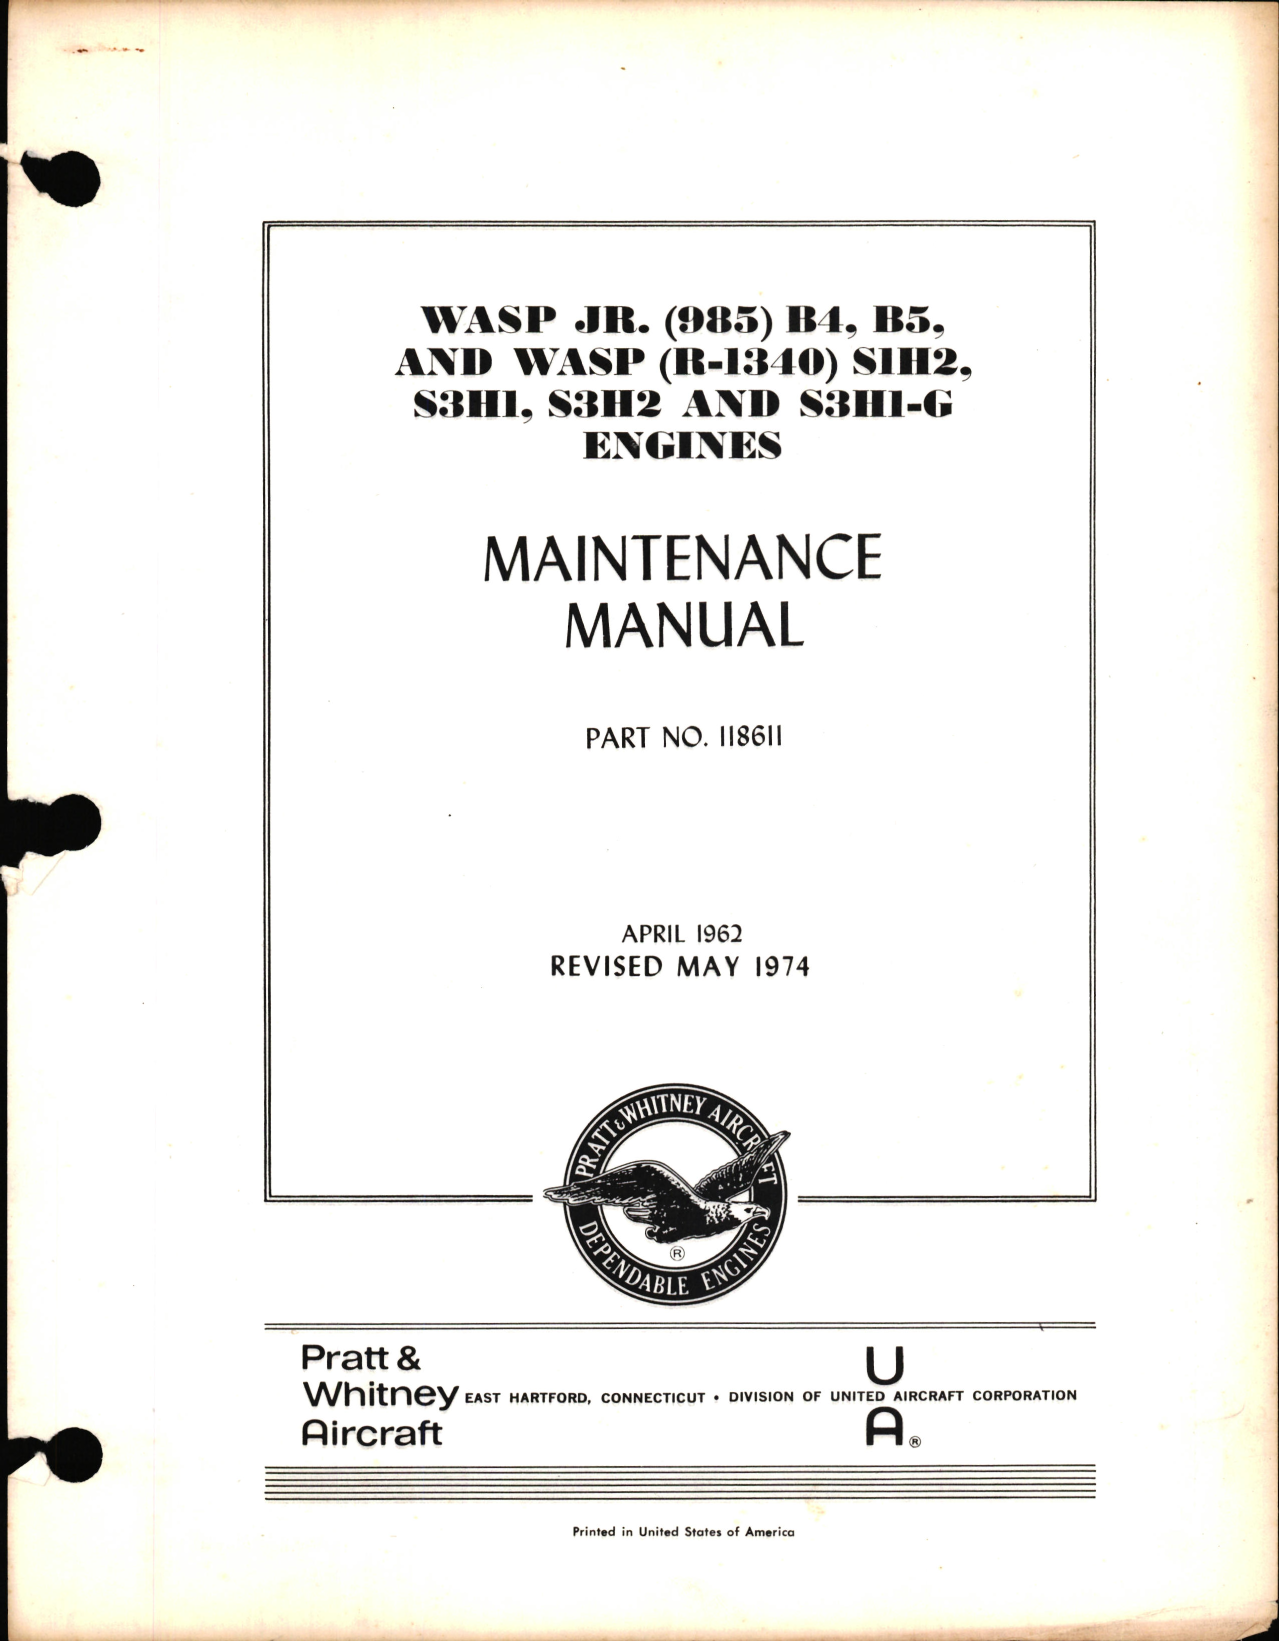 Sample page 1 from AirCorps Library document: Maintenance Manual for Wasp Jr. and Wasp Engines